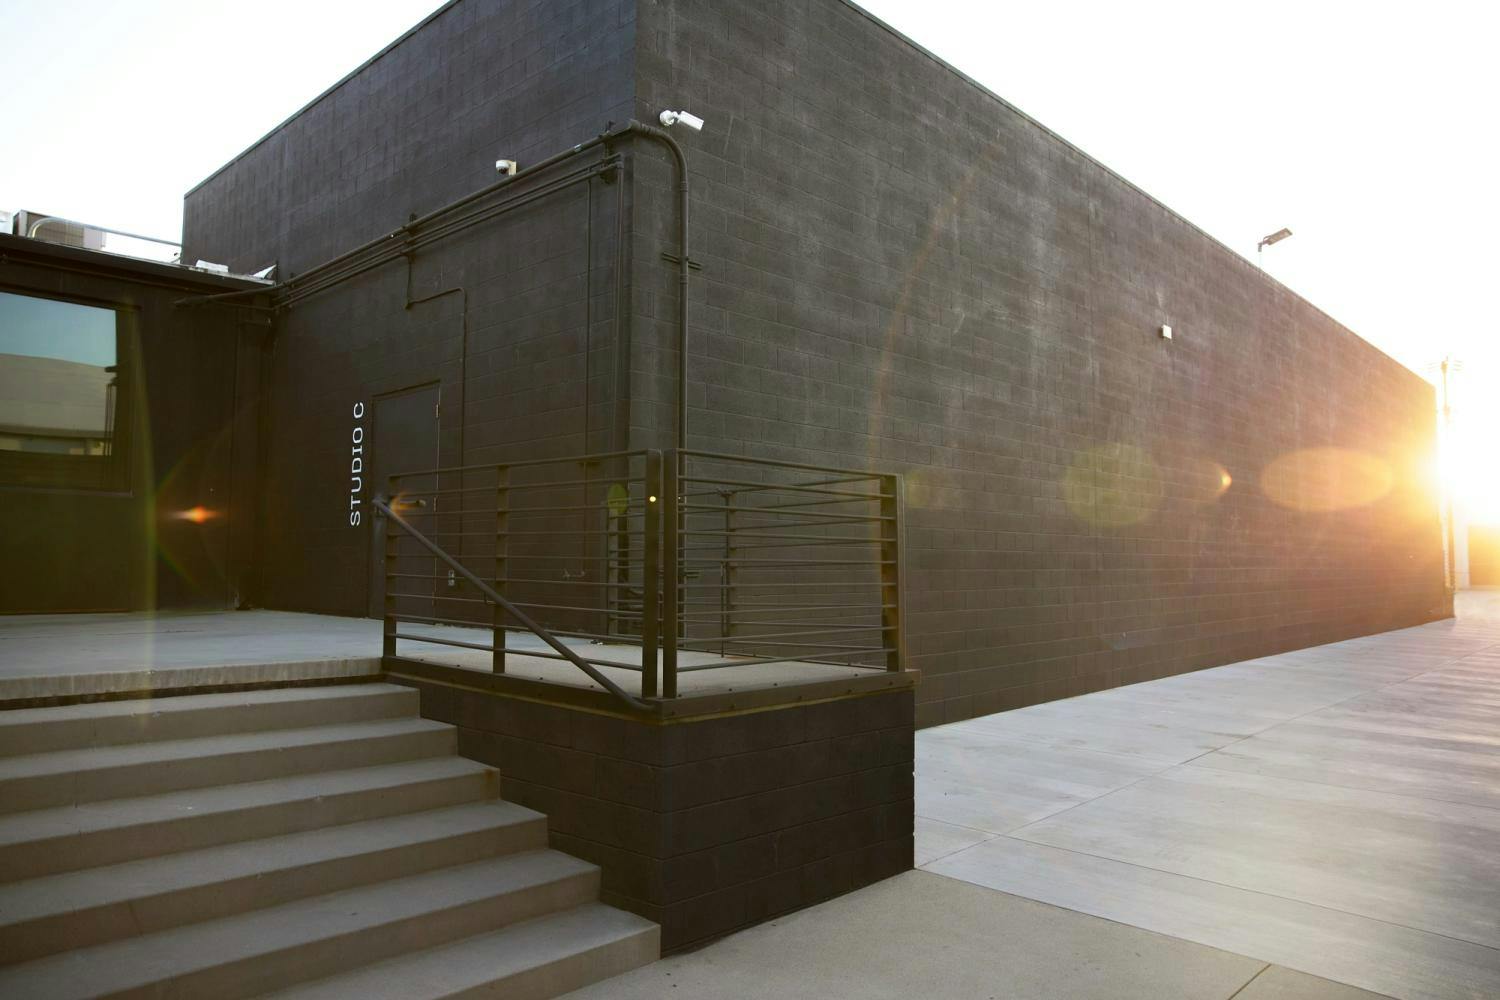 The exterior of Studio C captured at sunset, featuring concrete stairs, a railing, and a black brick wall, with the sun's glare adding a warm ambiance.